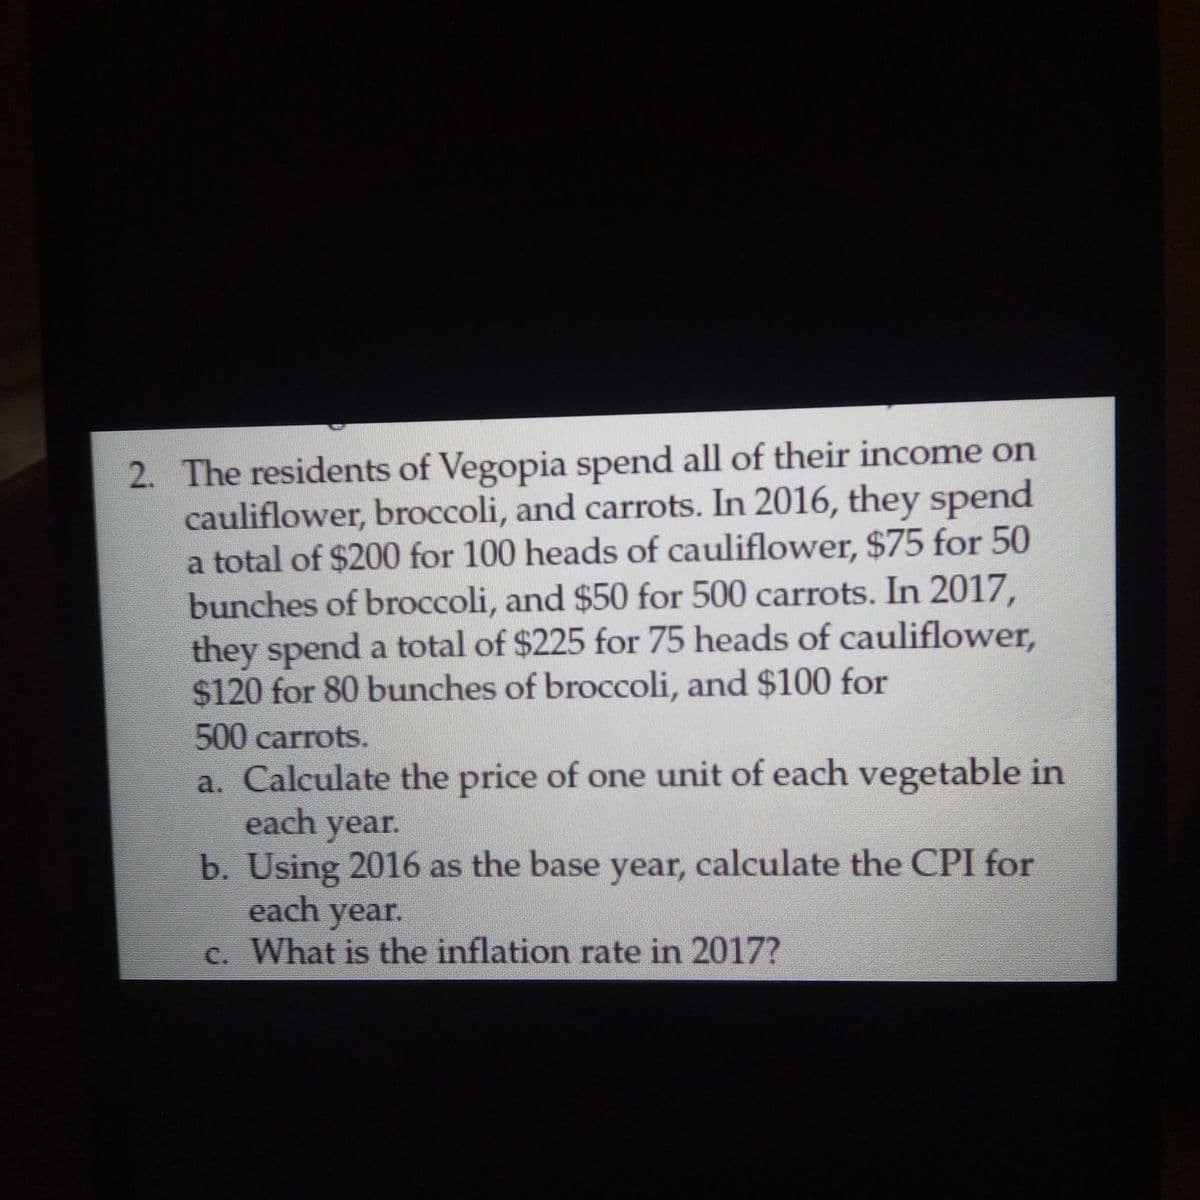 2. The residents of Vegopia spend all of their income on
cauliflower, broccoli, and carrots. In 2016, they spend
a total of $200 for 100 heads of cauliflower, $75 for 50
bunches of broccoli, and $50 for 500 carrots. In 2017,
they spend a total of $225 for 75 heads of cauliflower,
$120 for 80 bunches of broccoli, and $100 for
500carrots.
a. Calculate the price of one unit of each vegetable in
each year.
b. Using 2016 as the base year, calculate the CPI for
each year.
c. What is the inflation rate in 2017?
